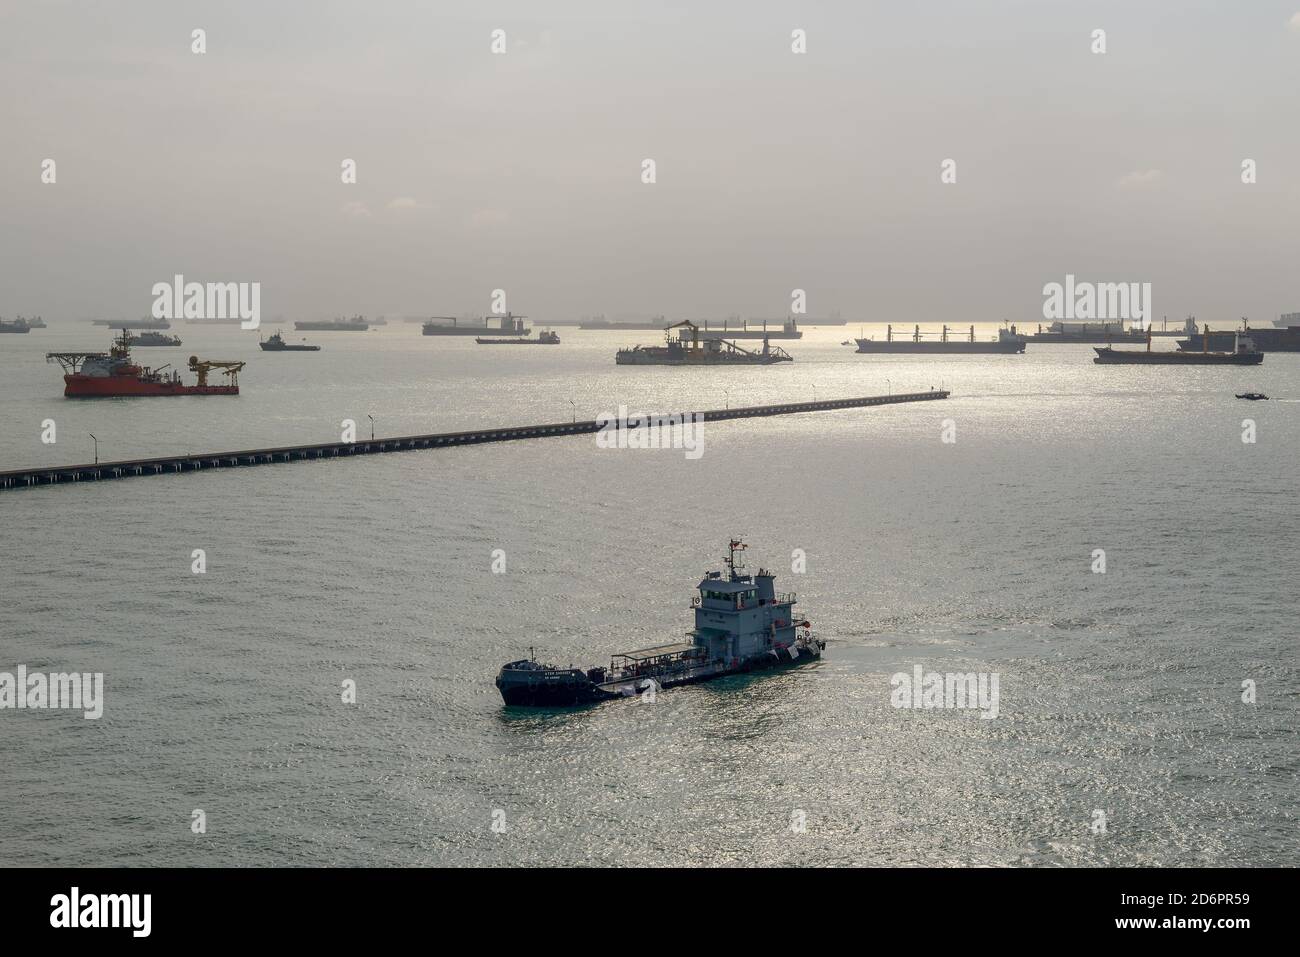 Singapore - December 3, 2019: Large collection of commercial cargo ships waiting at the anchorage just off the coast of Singapore in backlight. Stock Photo